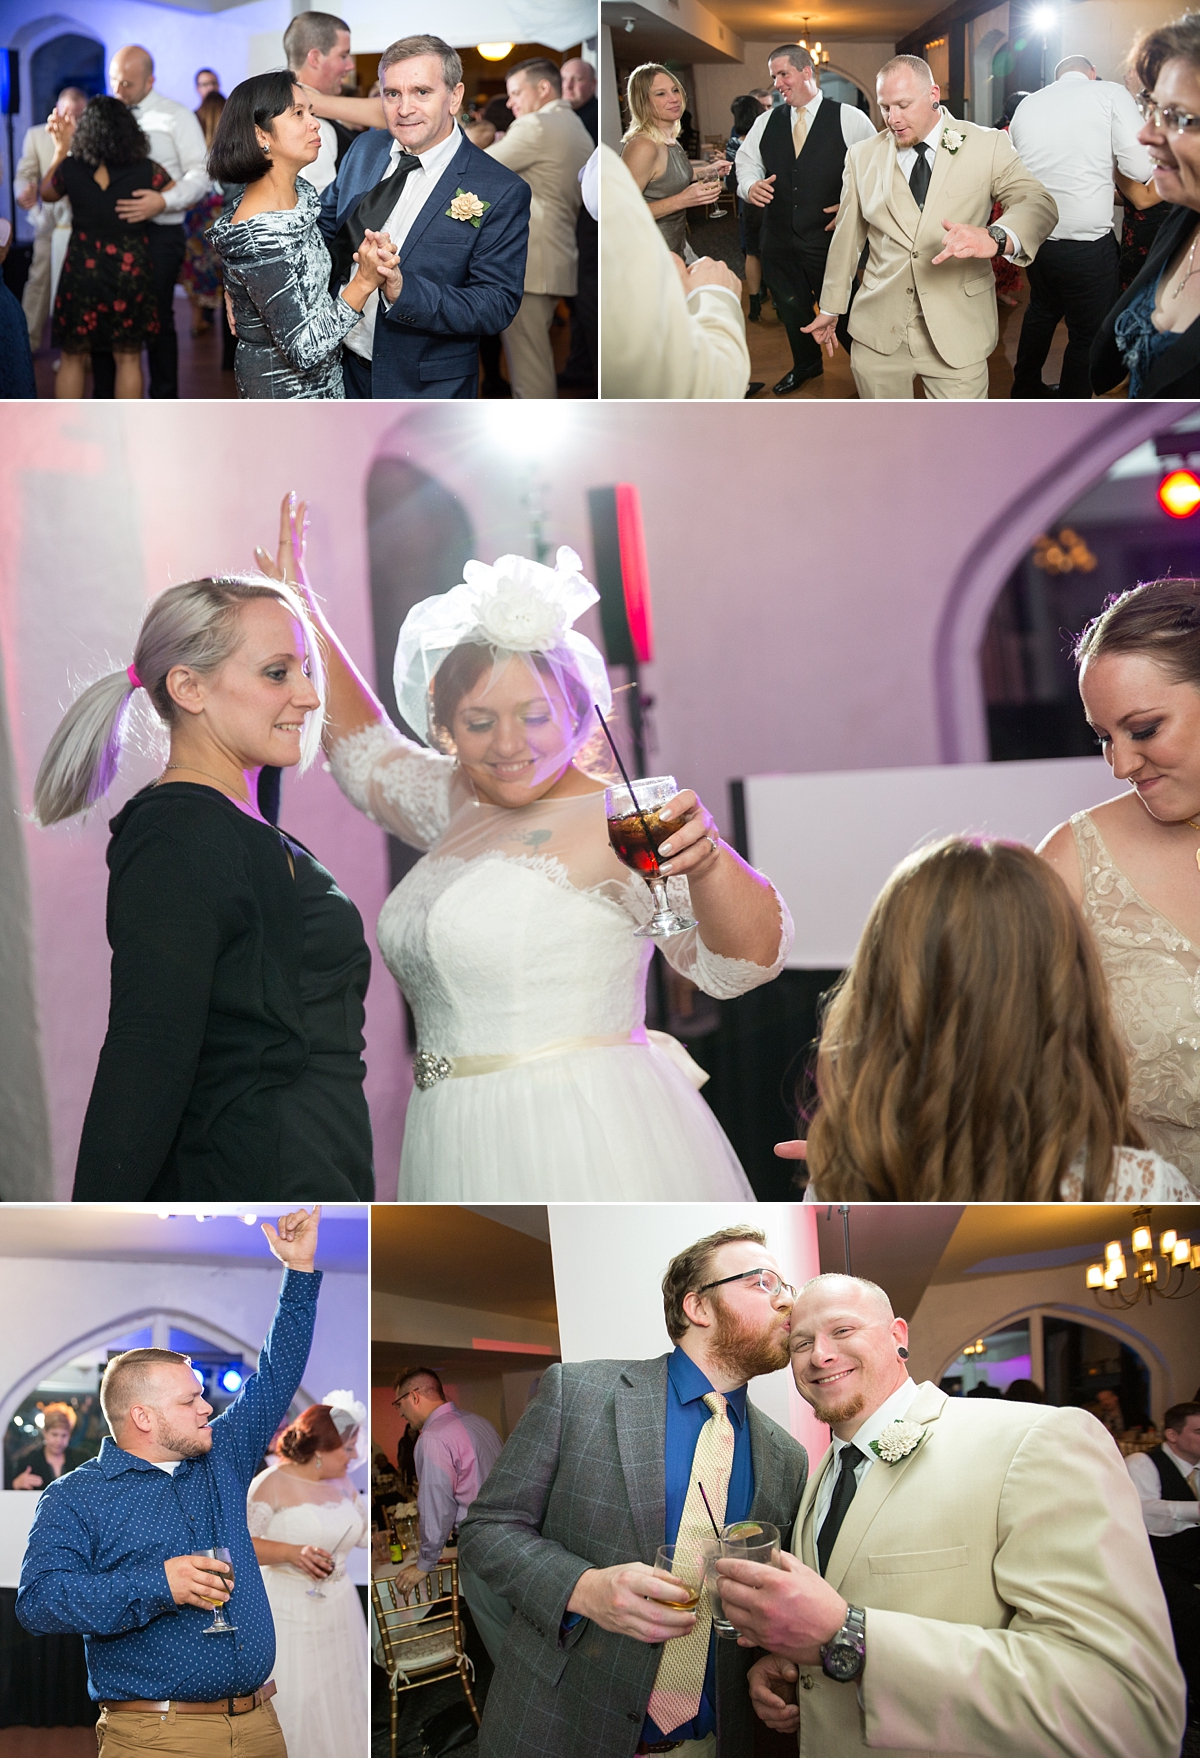 beardslee castle, little falls, ny, sarah heppell photography, wedding reception guests dancing, bride dancing at reception